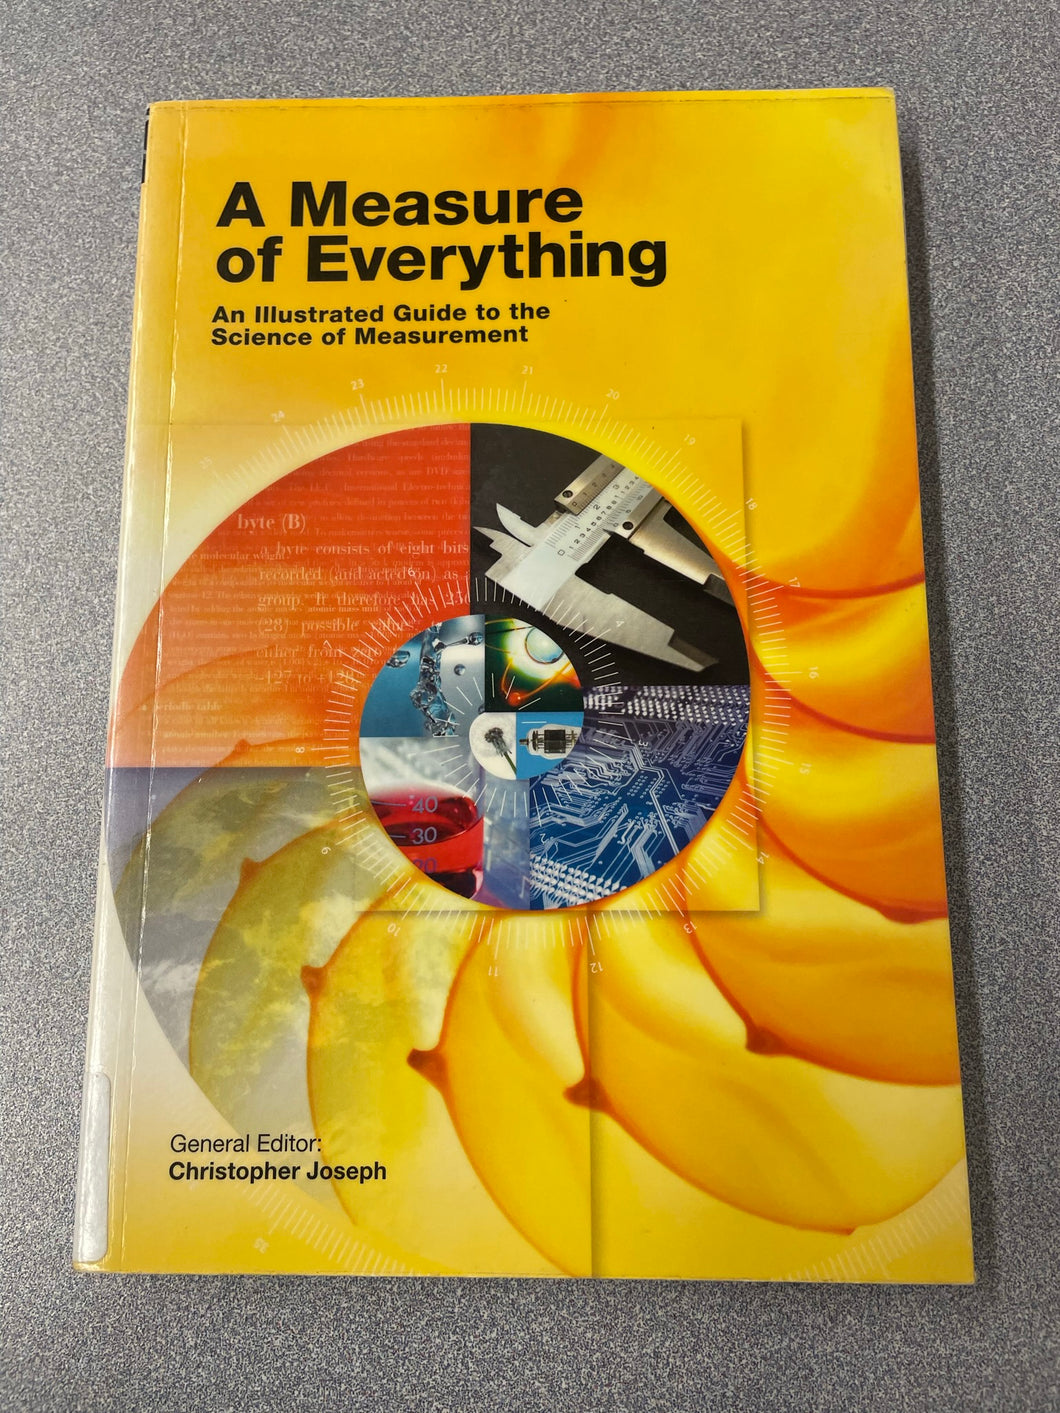 A Measure of Everything: An Illustrated Guide to the Science of Measurement, Joseph, Christopher, ed .  [2005]  SN 11/22